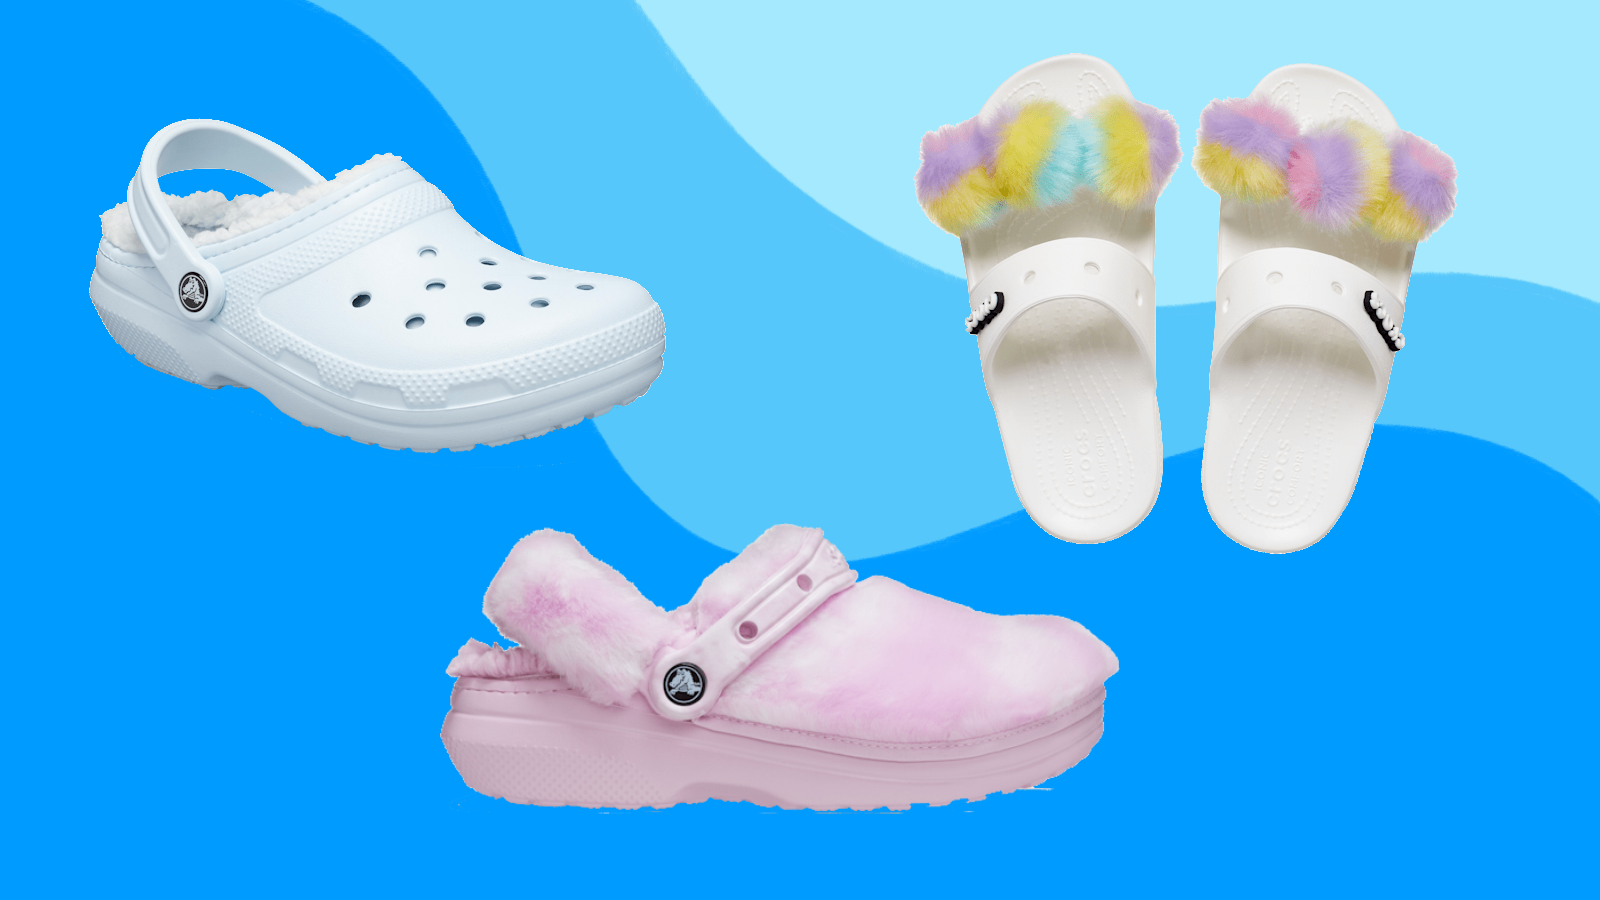 The most popular pairs of Crocs with fur to buy right now